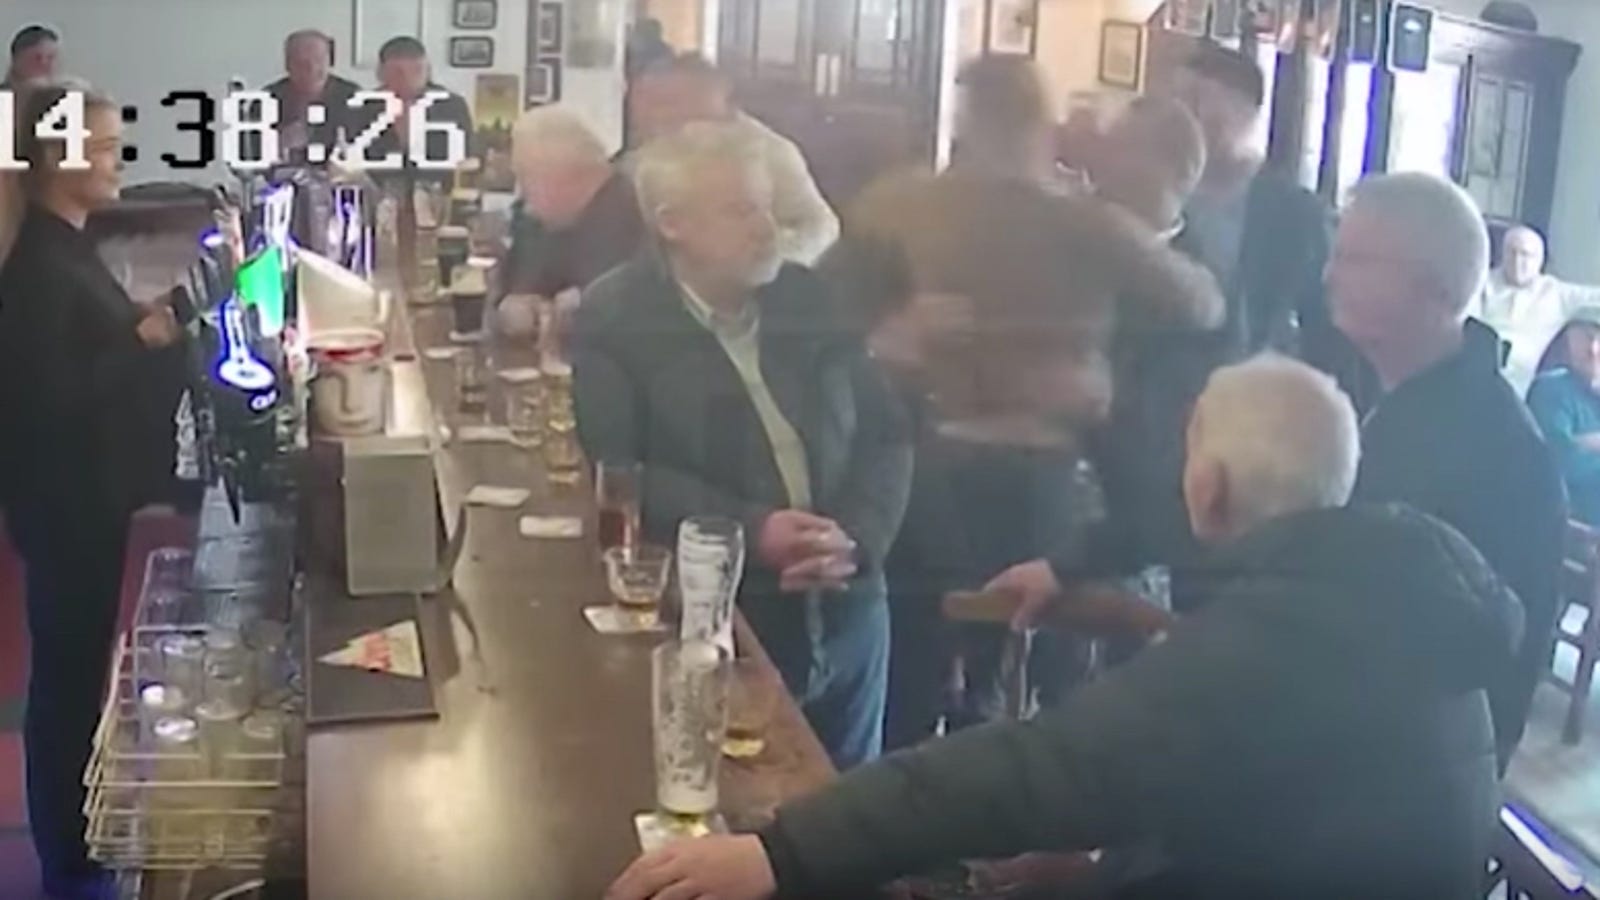 Flipboard: Conor McGregor Sucker-Punches Old Man After Whiskey Argument In Dublin Pub